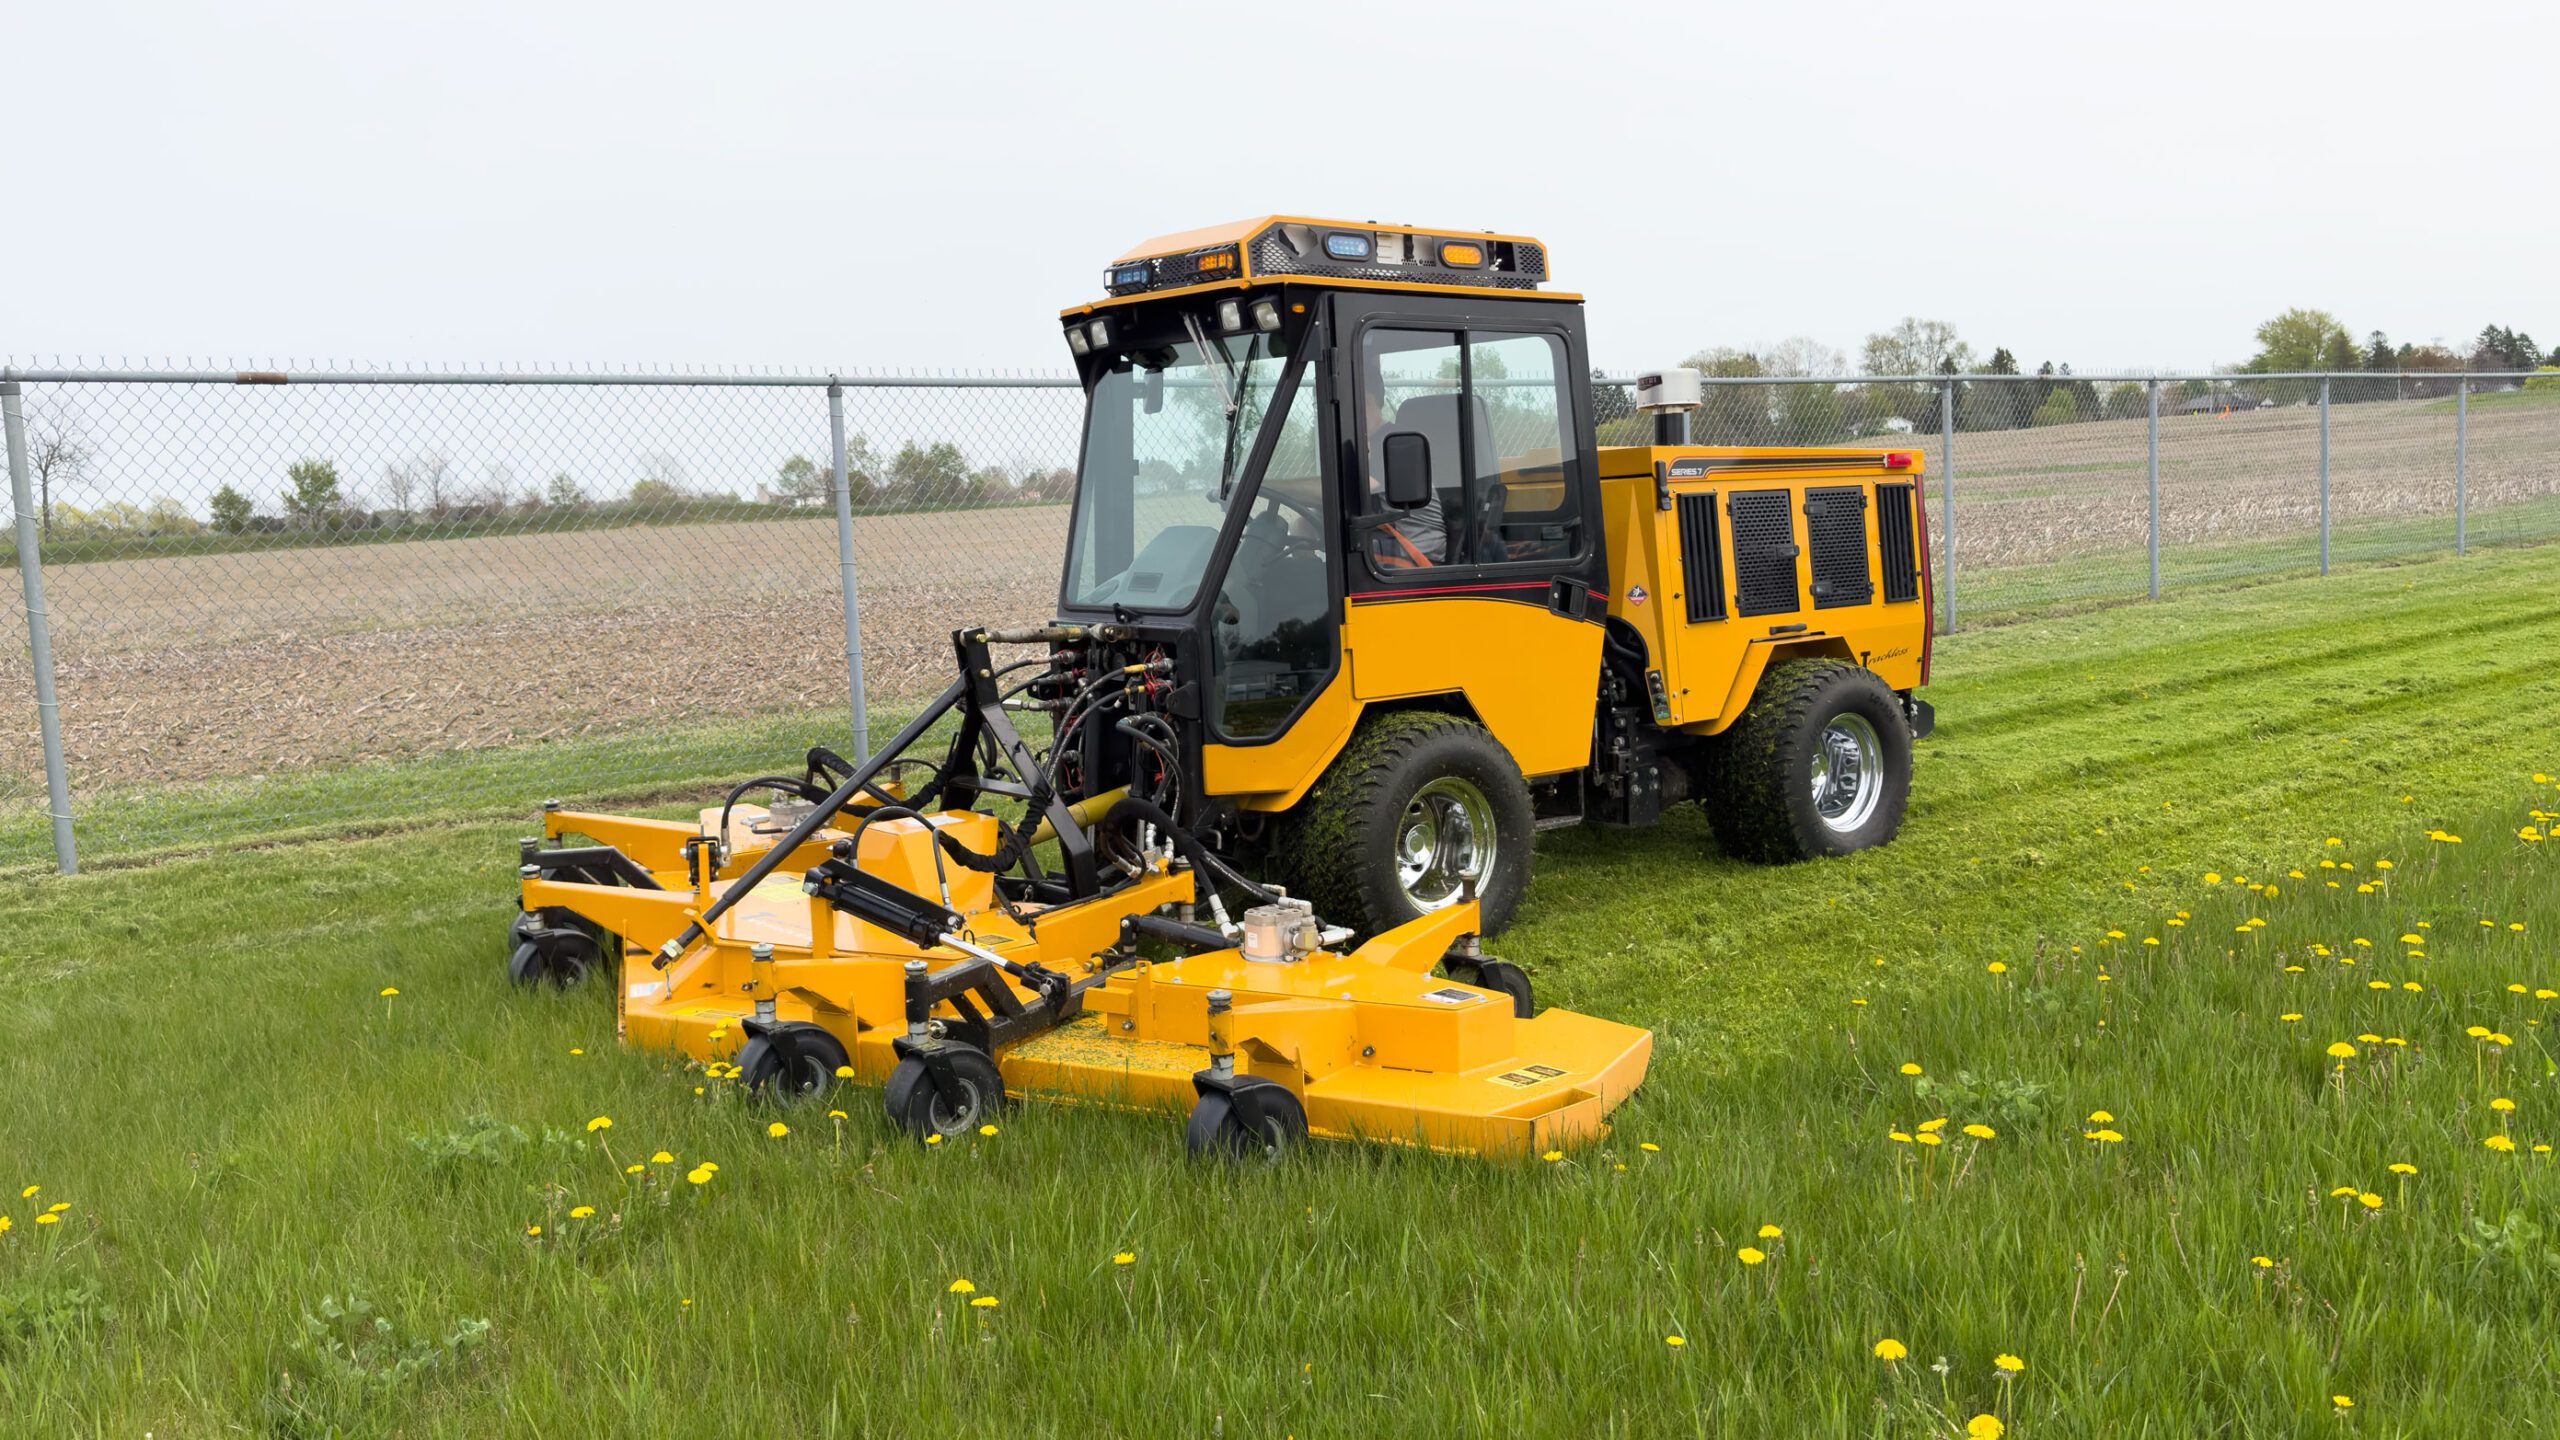 trackless vehicles mt7 tractor machine with rotary mower attachment mowing grass